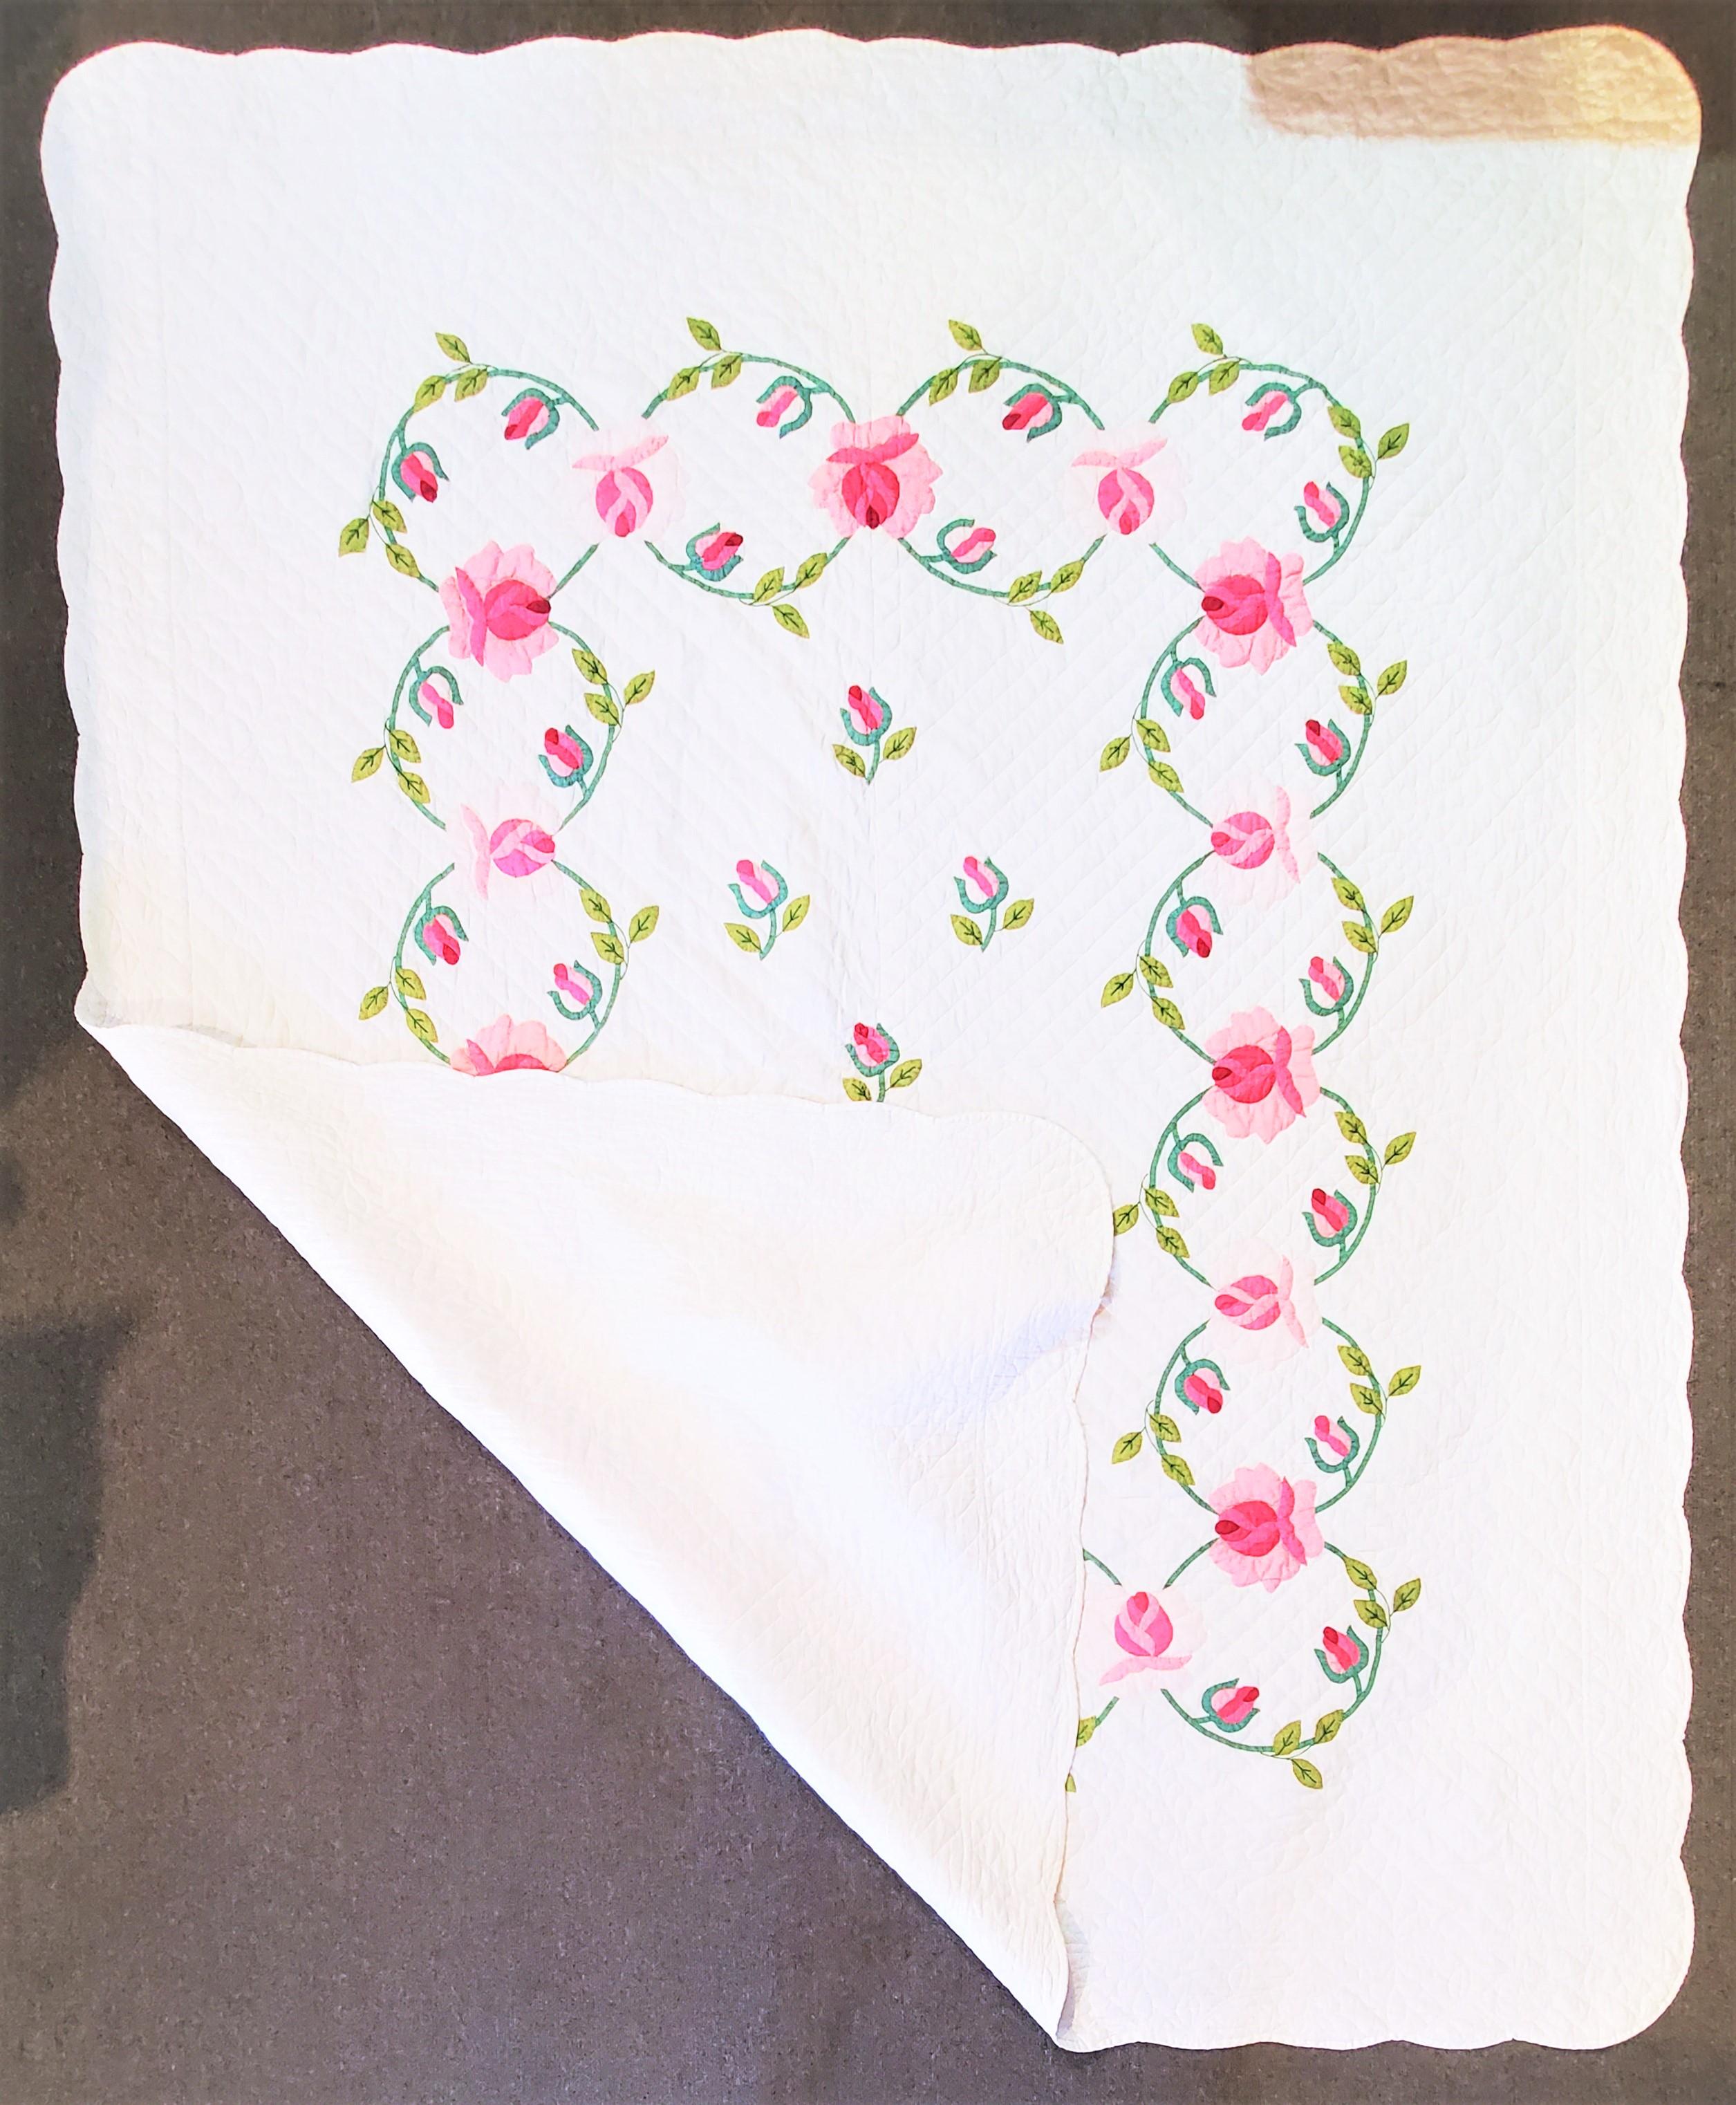 20th century hand applique roses quilt with fine tight quilting. The condition is very clean.